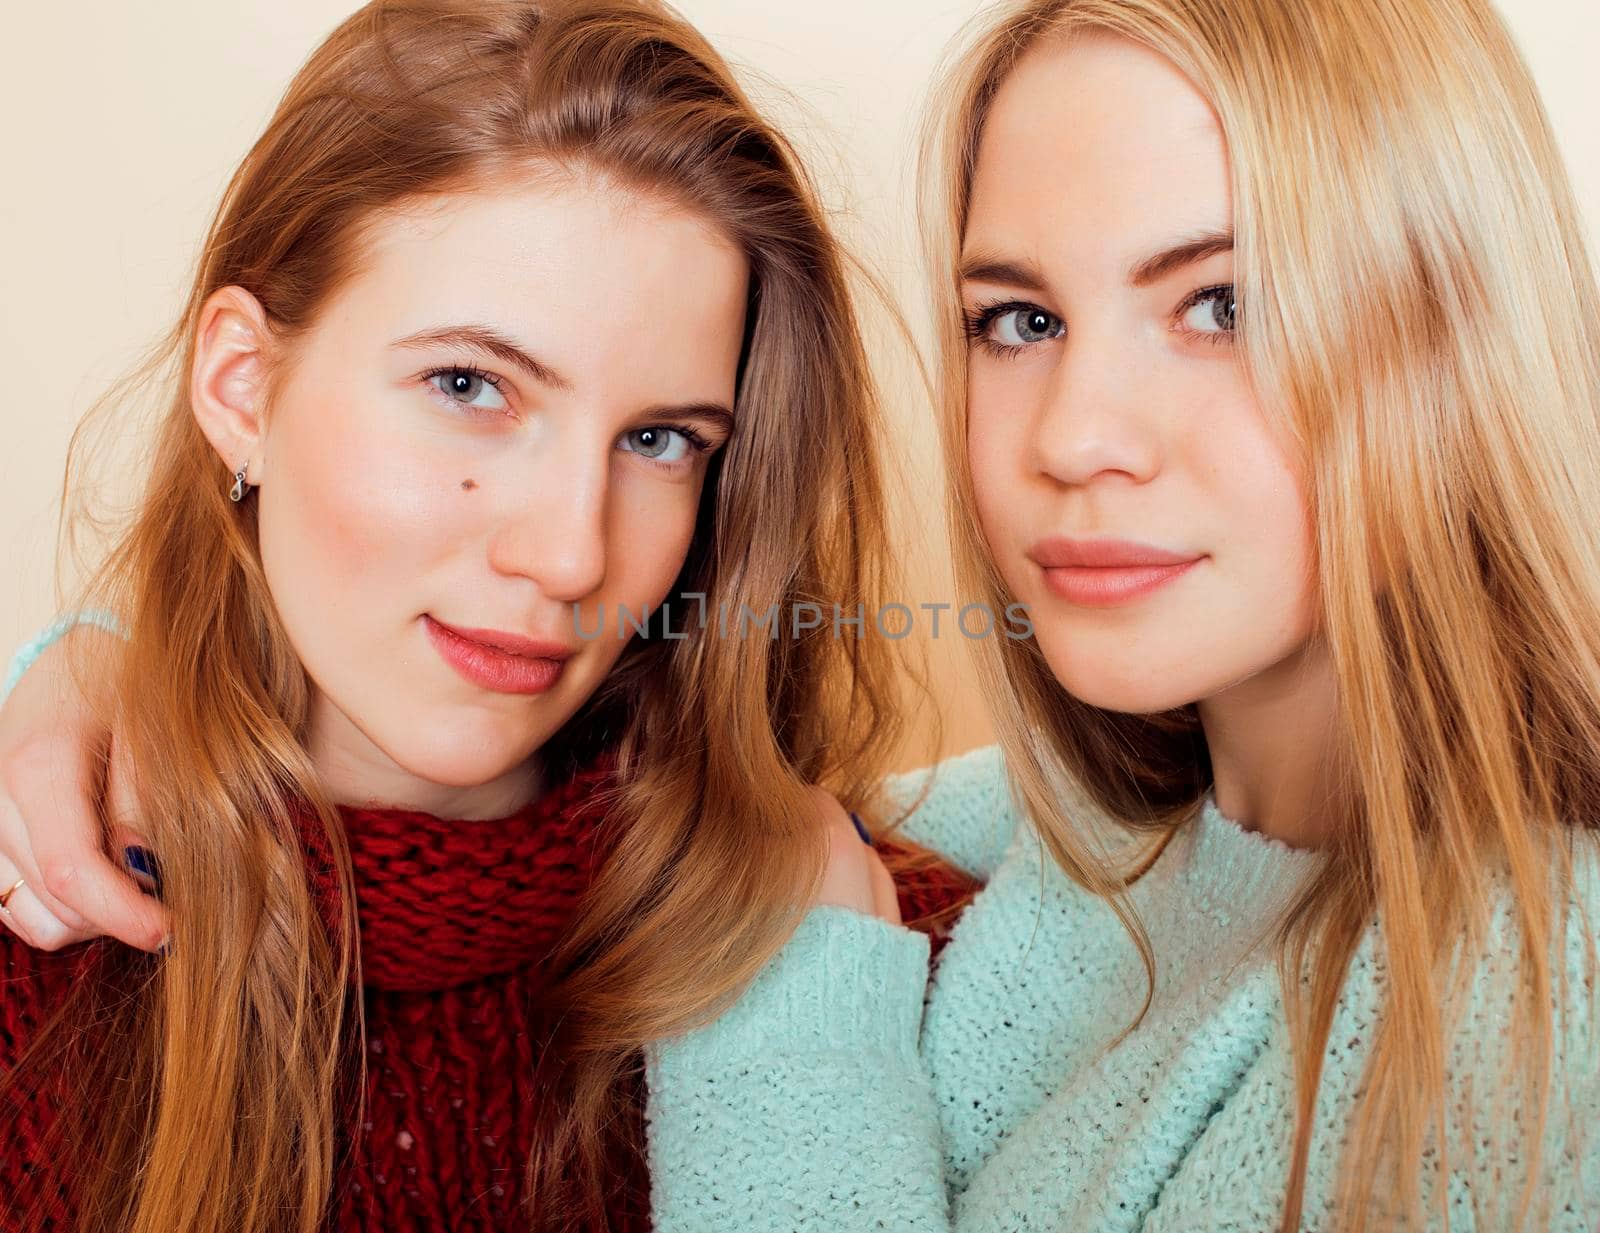 best friends teenage girls together having fun, posing emotional on white background, besties happy smiling, lifestyle real people concept close up. making selfie